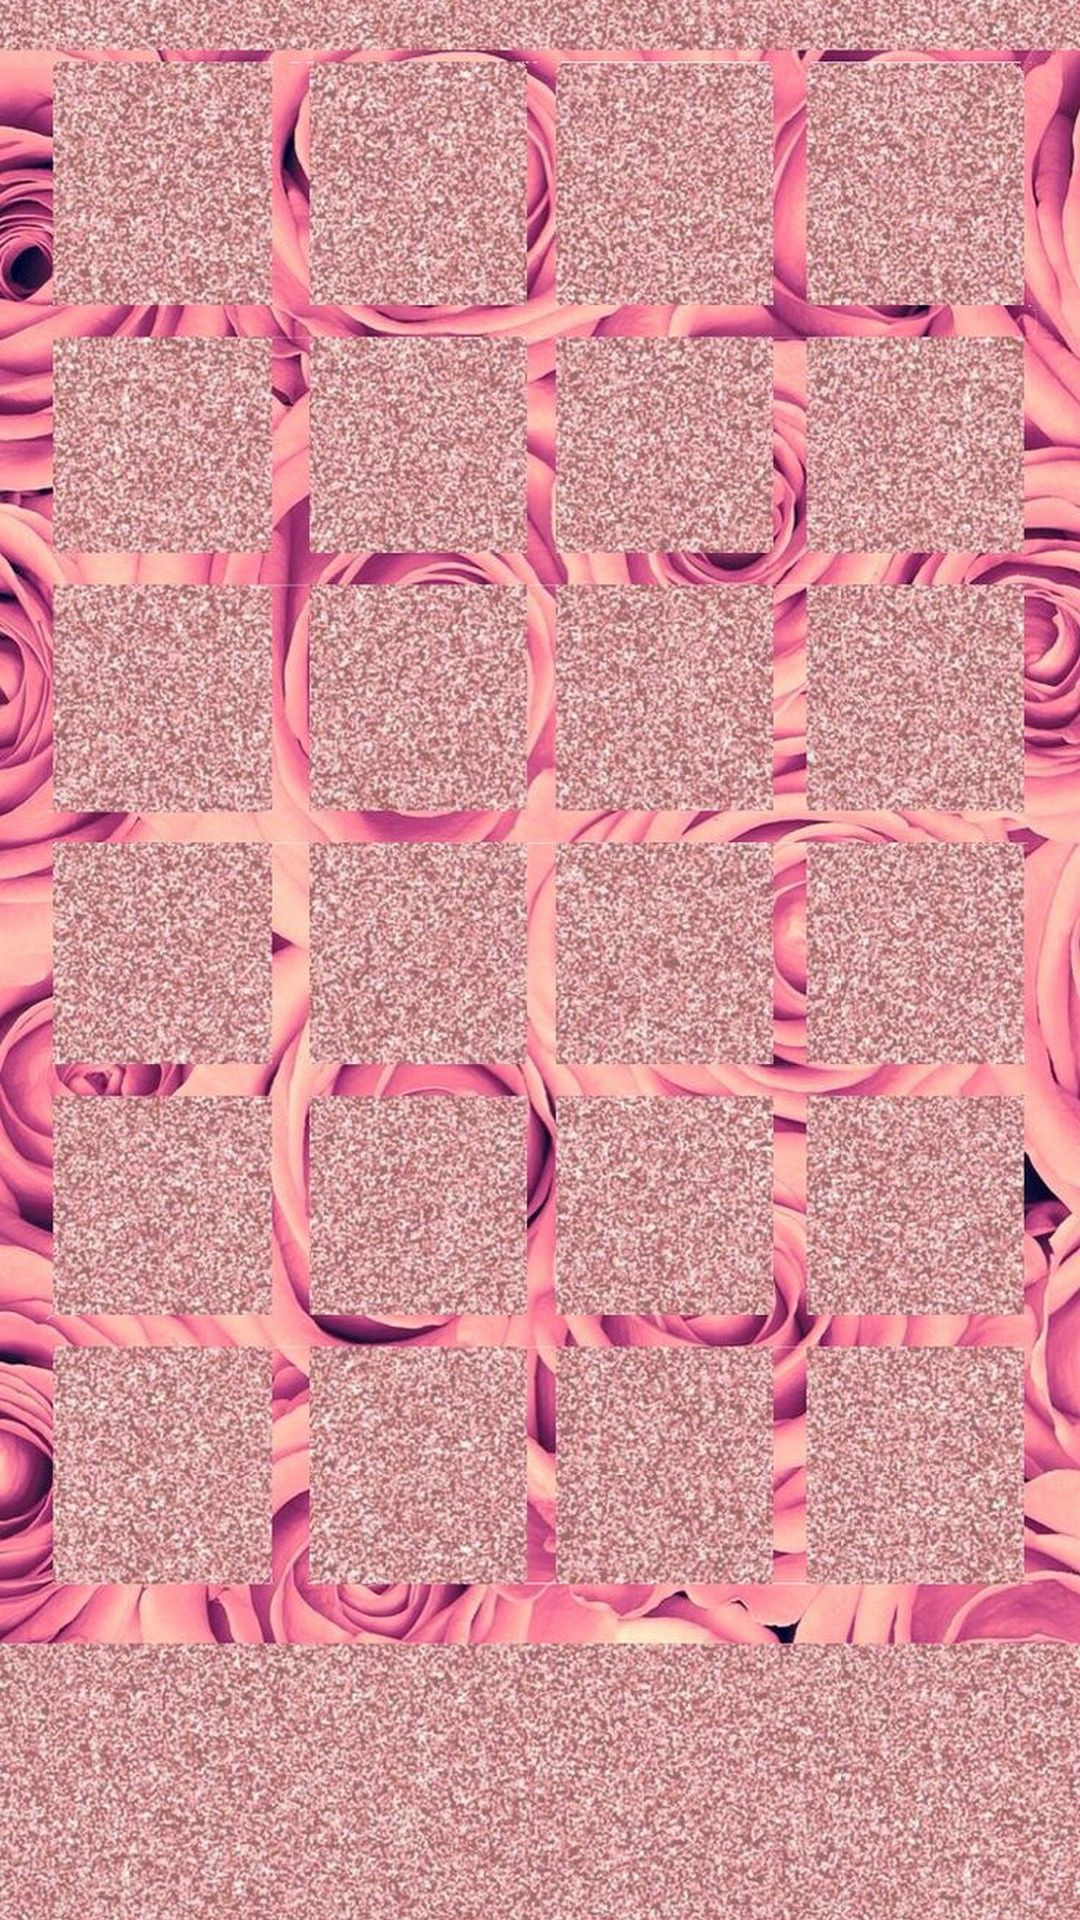 1080x1920 1920x1344 ... rose gold sparkle iphone wallpaper .